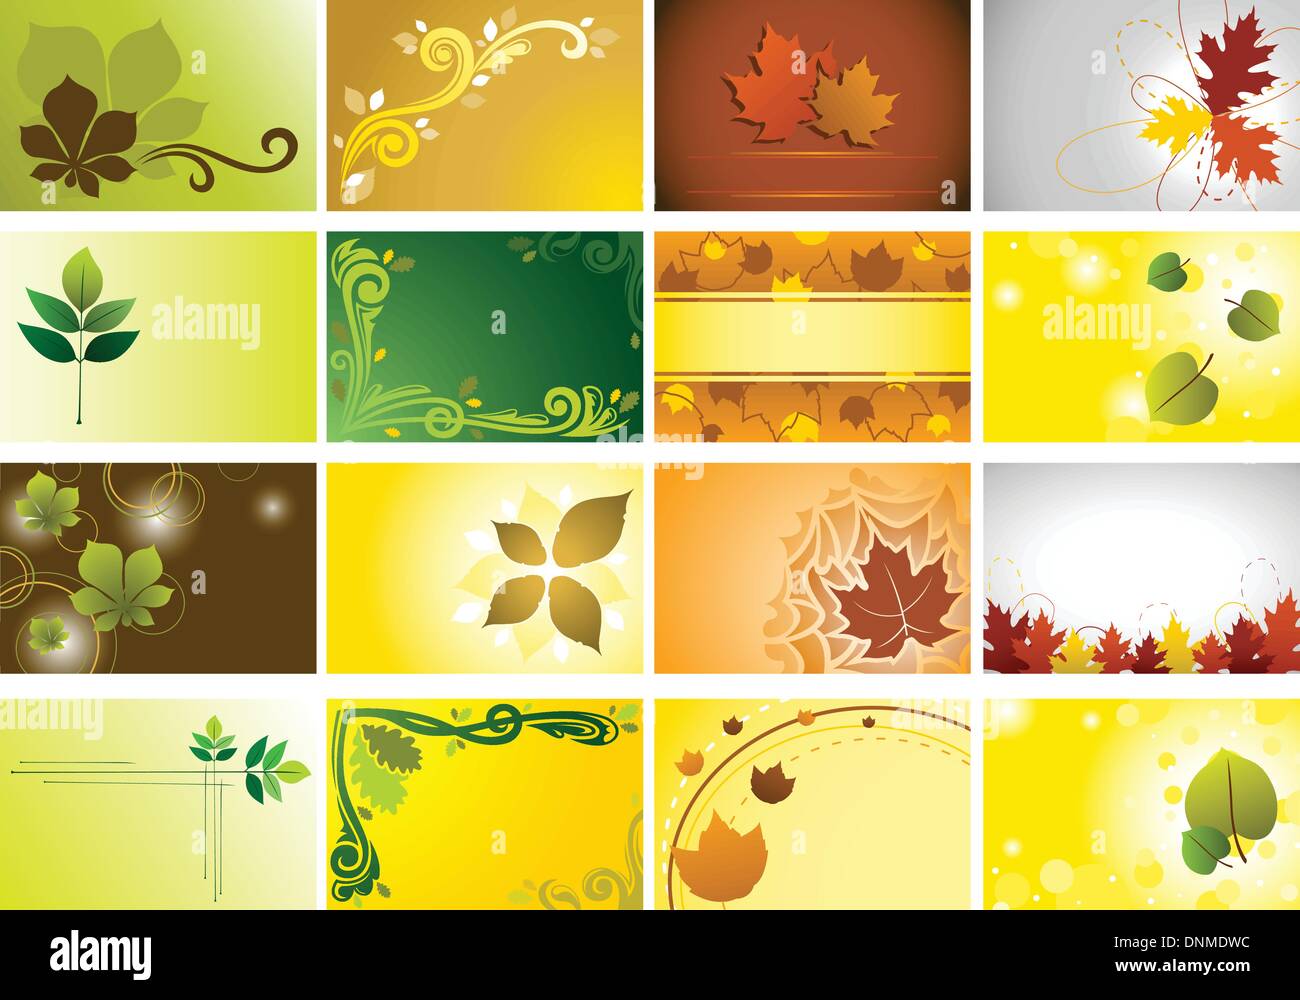 A vector illustration of a set of autumn background Stock Vector